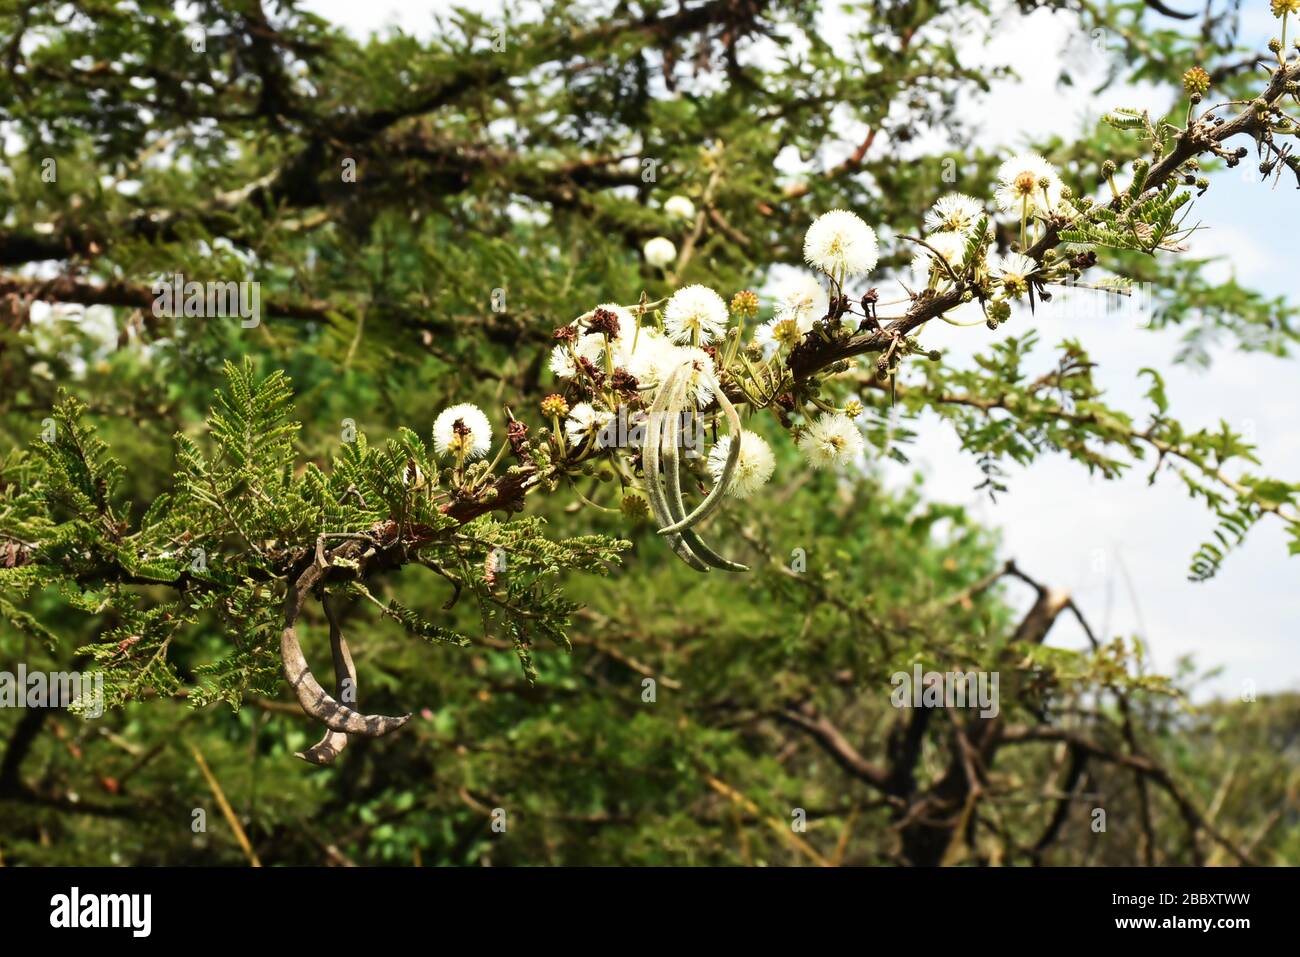 Acacia branch and flowers in savanna forest in Eastern Province of Rwanda, East Africa Stock Photo